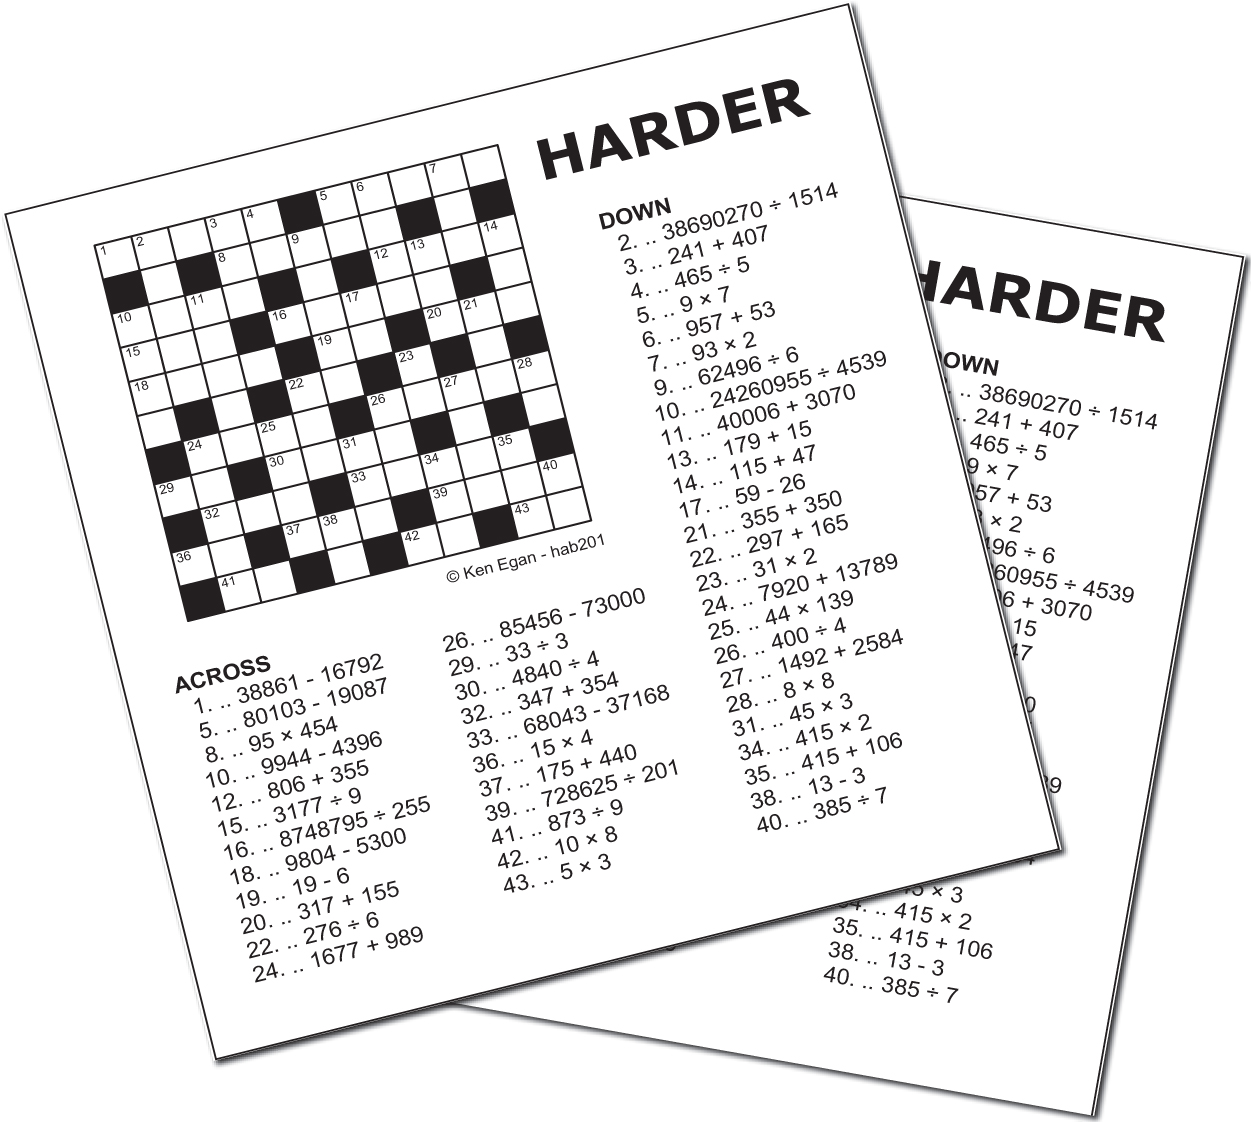 Category Image for Harder